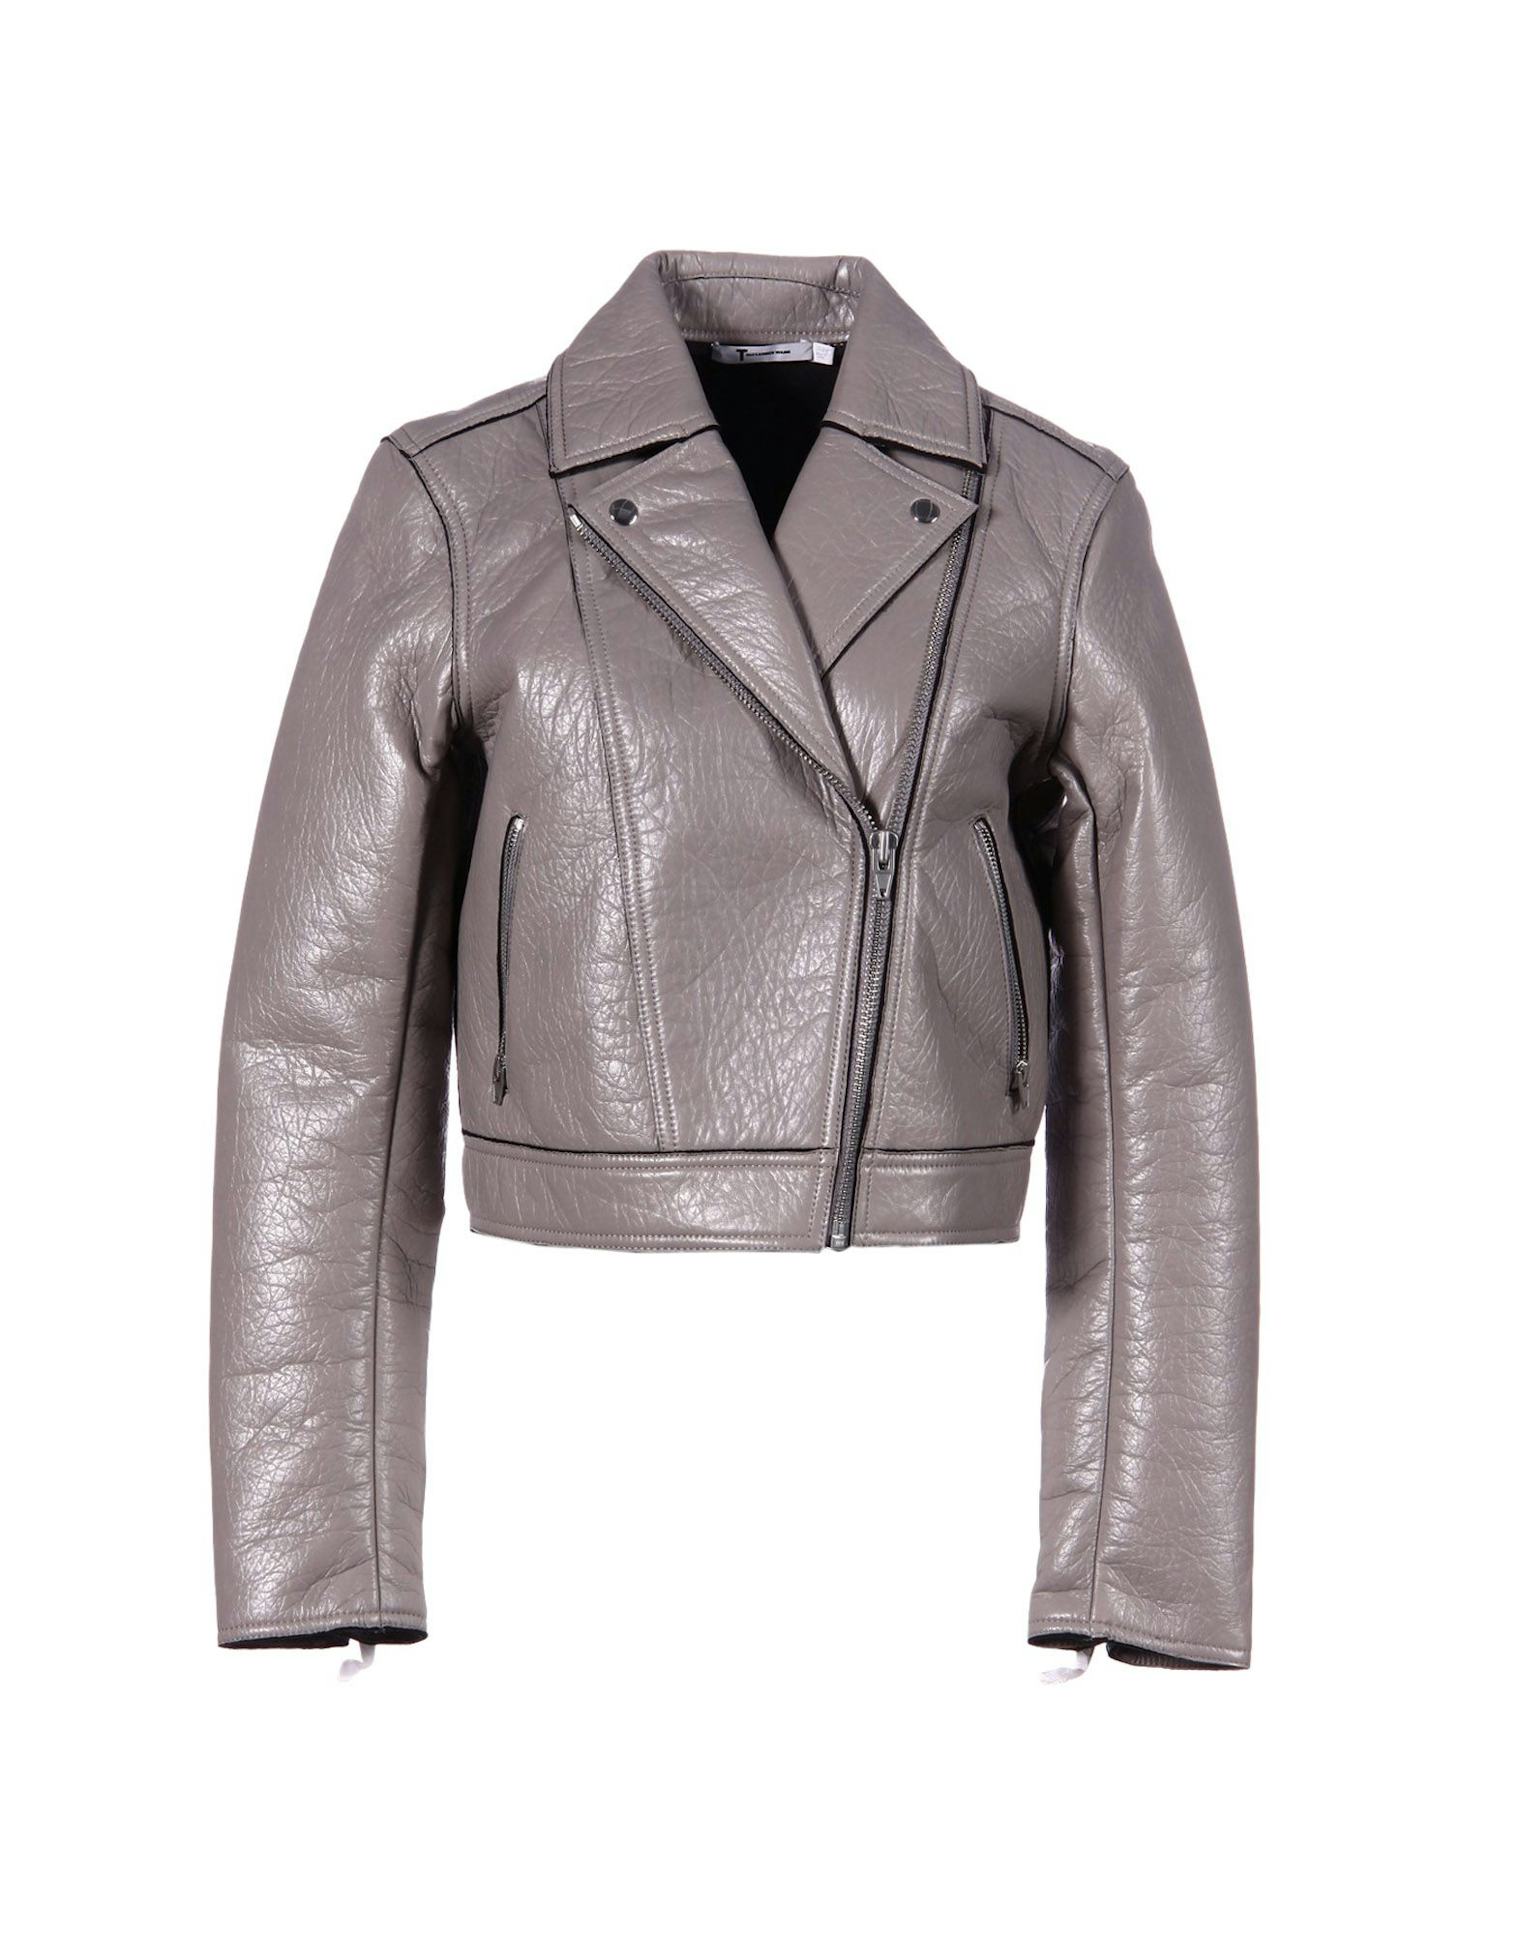 10 Leather Jackets With A Pop Of Color